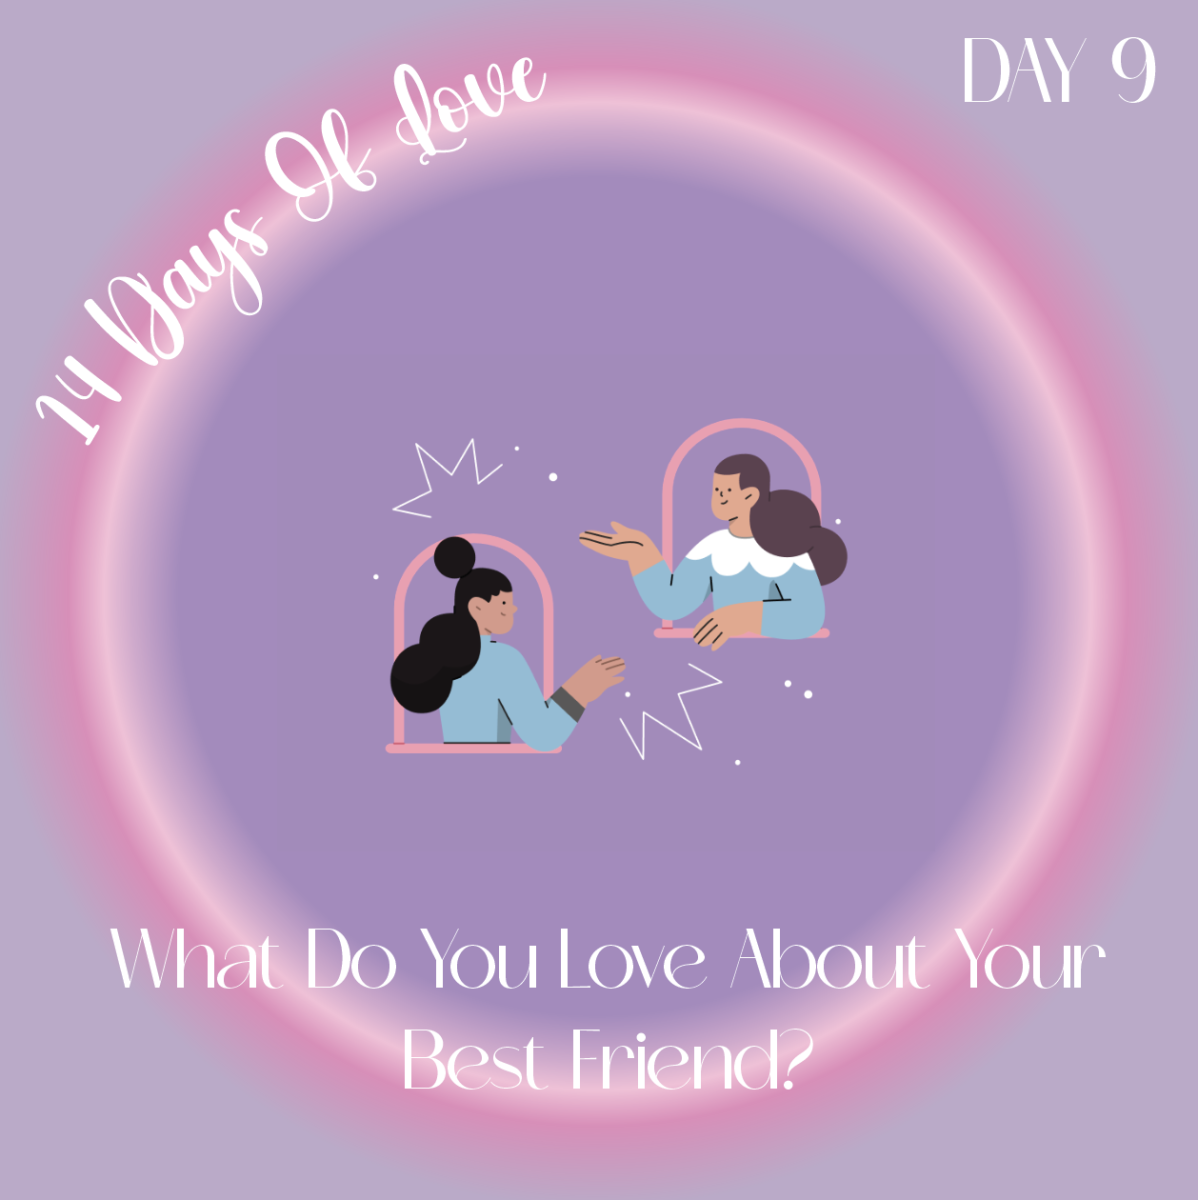 14 Days of Love Day 9: What Do You Love About Your Best Friend?